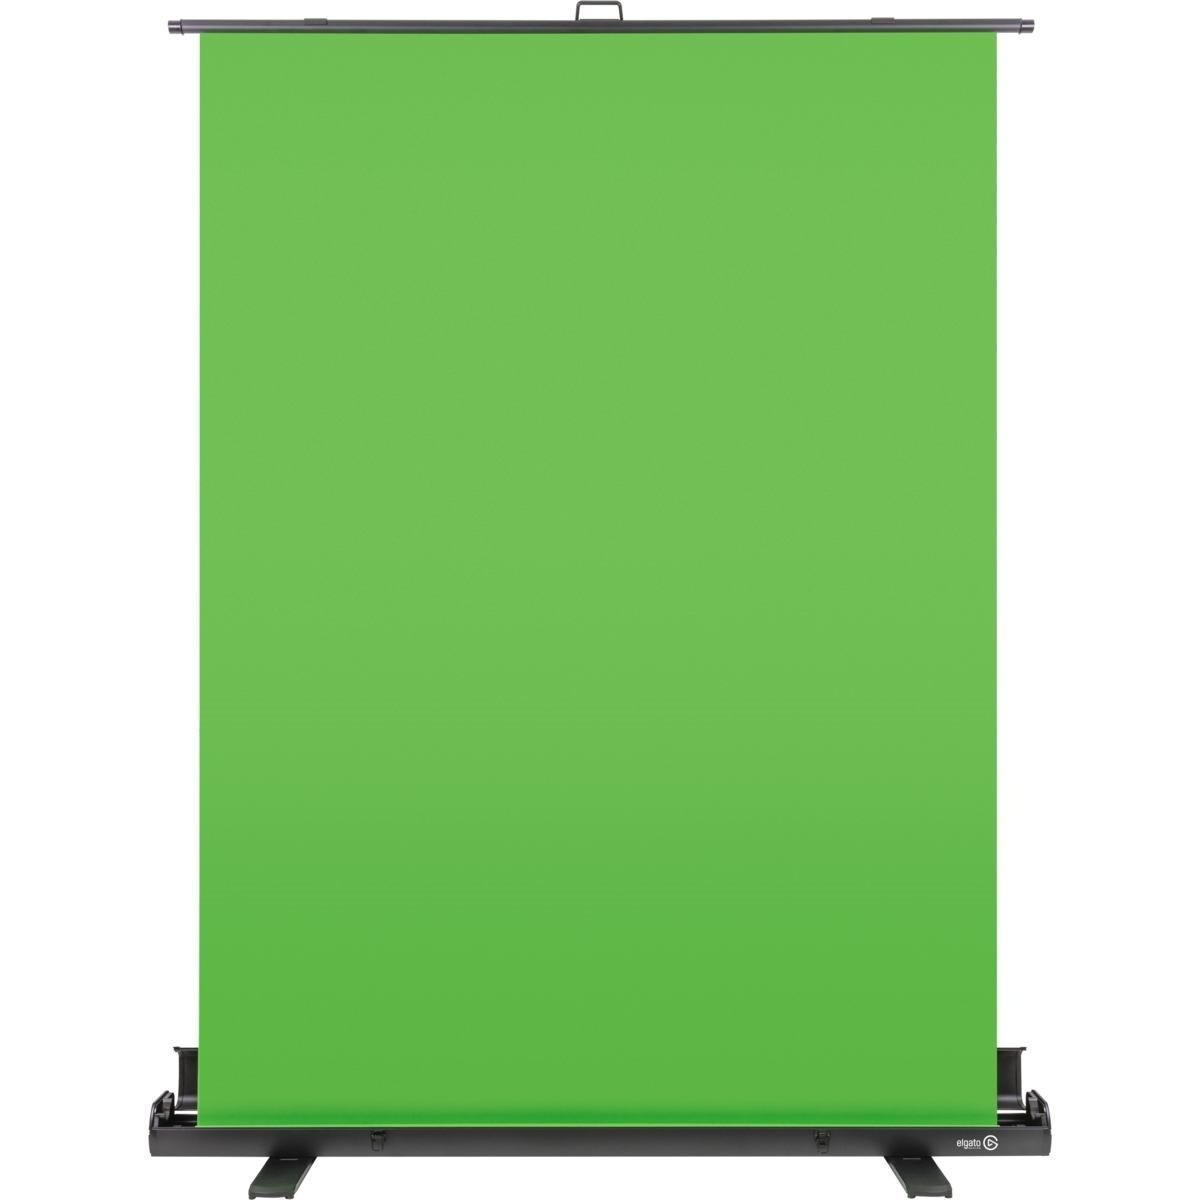 Elgato 10Gaf9901 Projection Screen (Elgato Collapsible Streaming Green Screen [10Gaf9901])